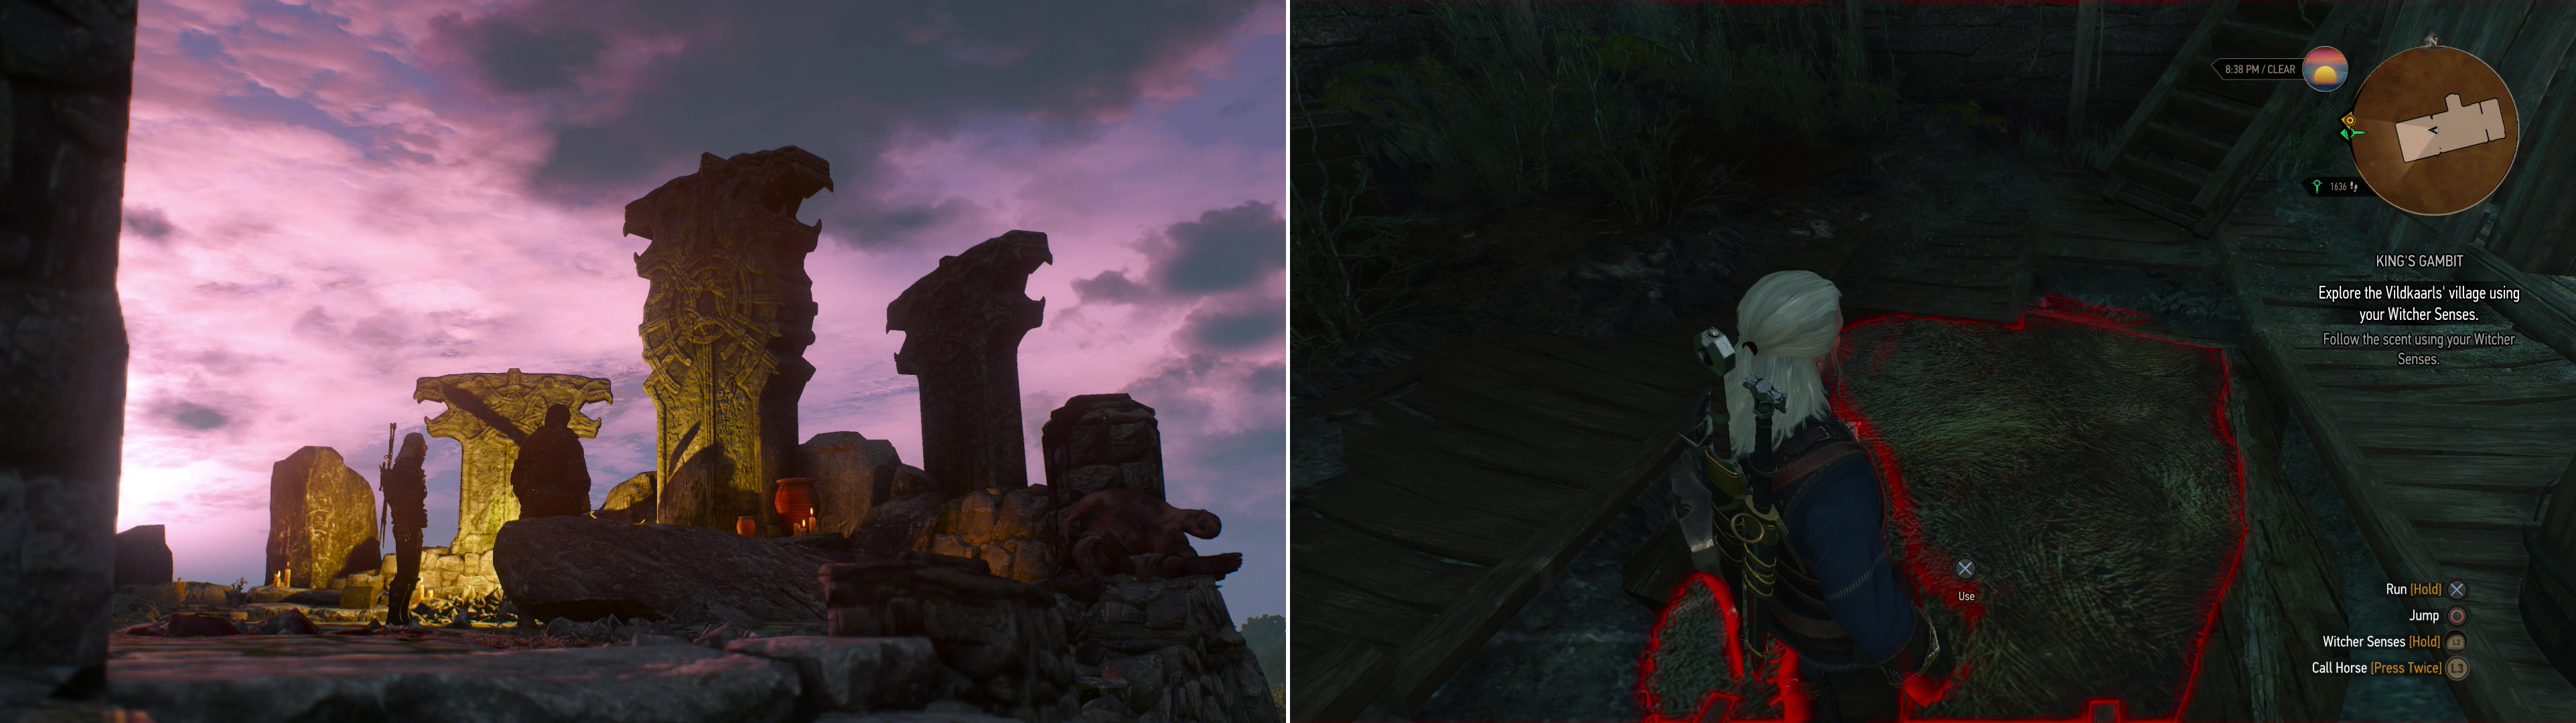 In the village of Fornhala, Geralt and Hjalmar will discover a shrine to Svalblod-a god so fierce, even the Skelligers don't worship him (left). Find a hidden trapdoor in one of the houses (right).